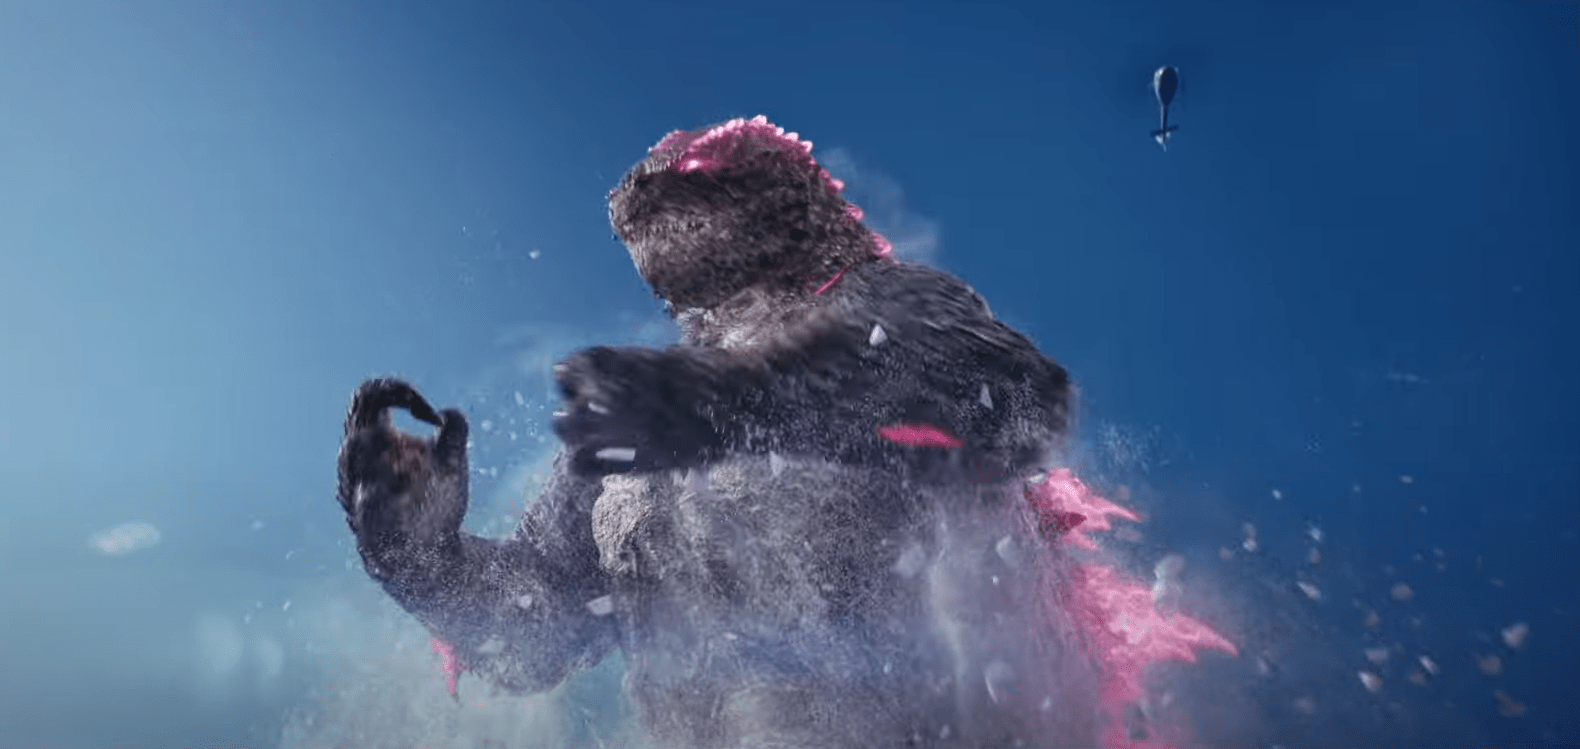 ‘Godzilla x Kong’ – Official ‘Tickets on Sale’ Trailer Celebrates the Legacy of the Monsterverse